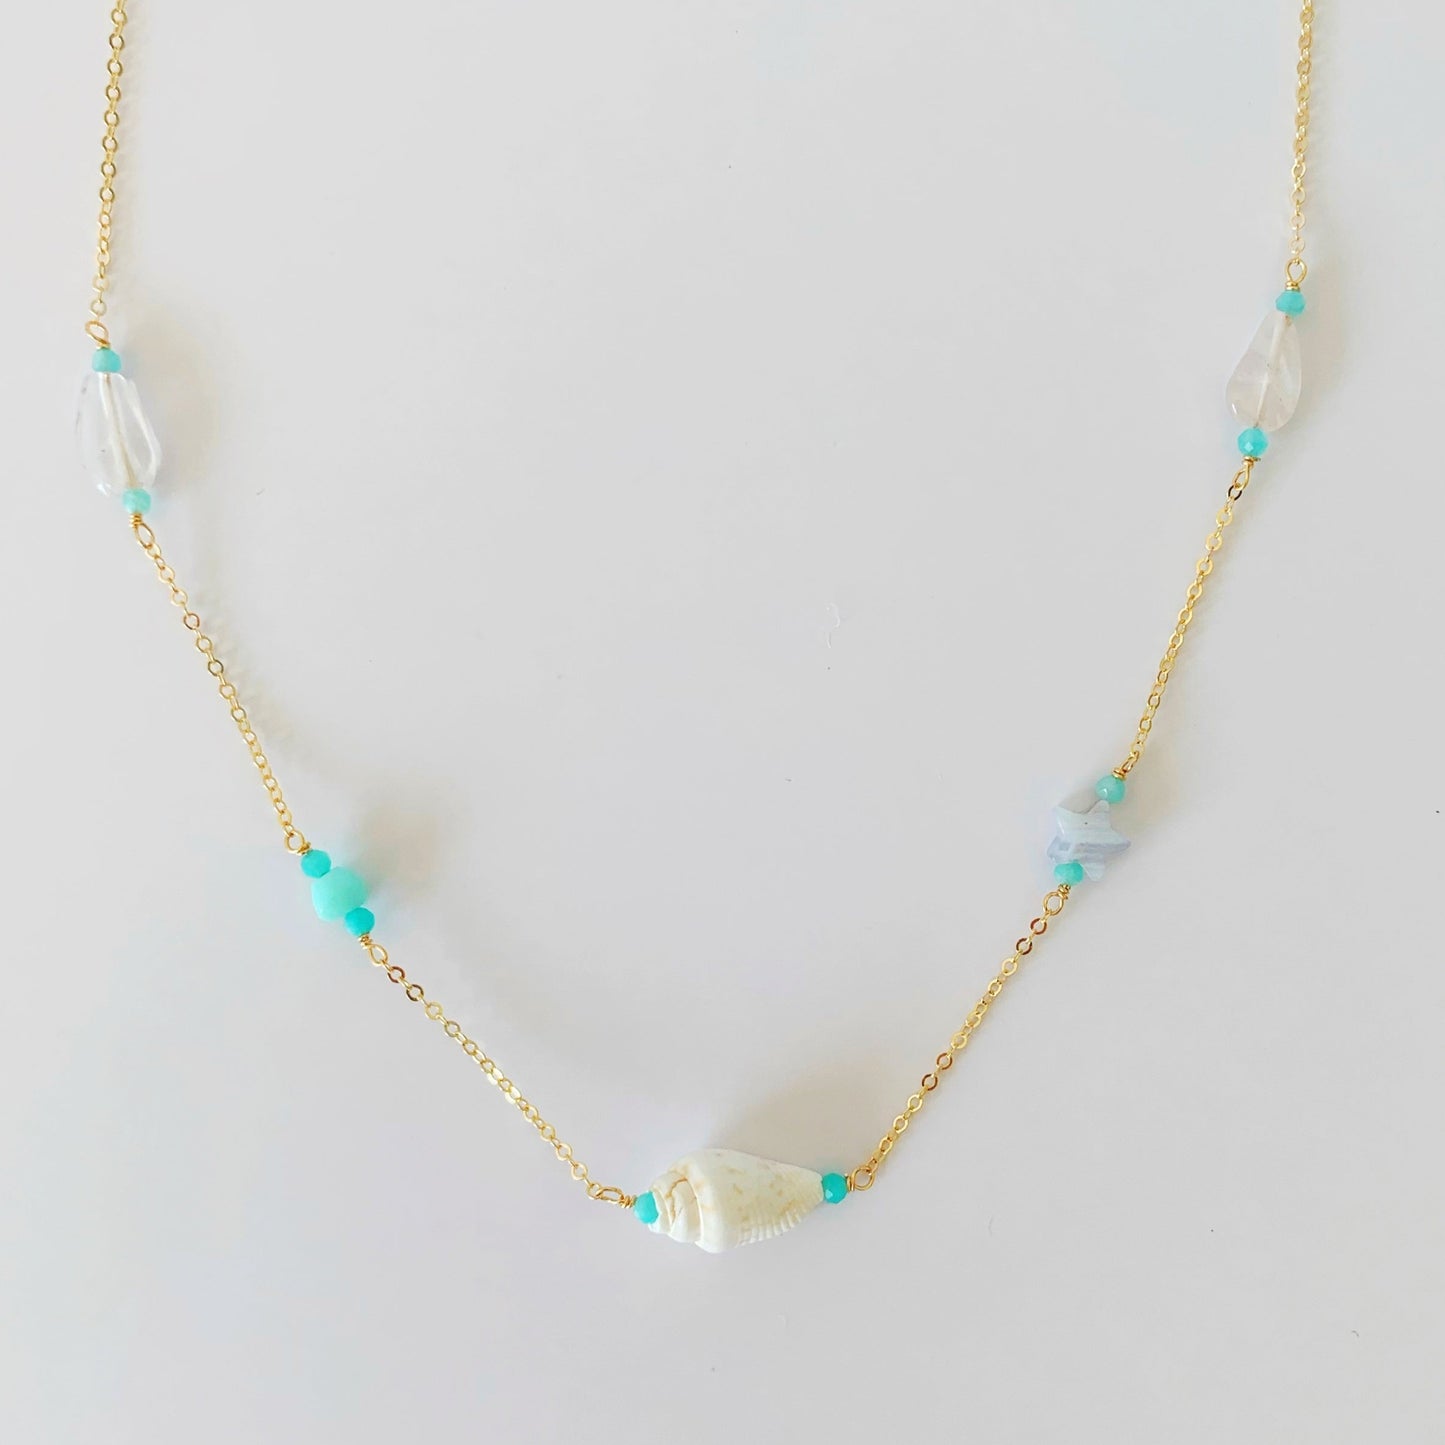 island hopper necklace by mermaids and madeleines is a station necklace with a shell at the center and a variety of semiprecious beads along the 14k gold filled chain to the clasp. this necklace is photographed on a white table